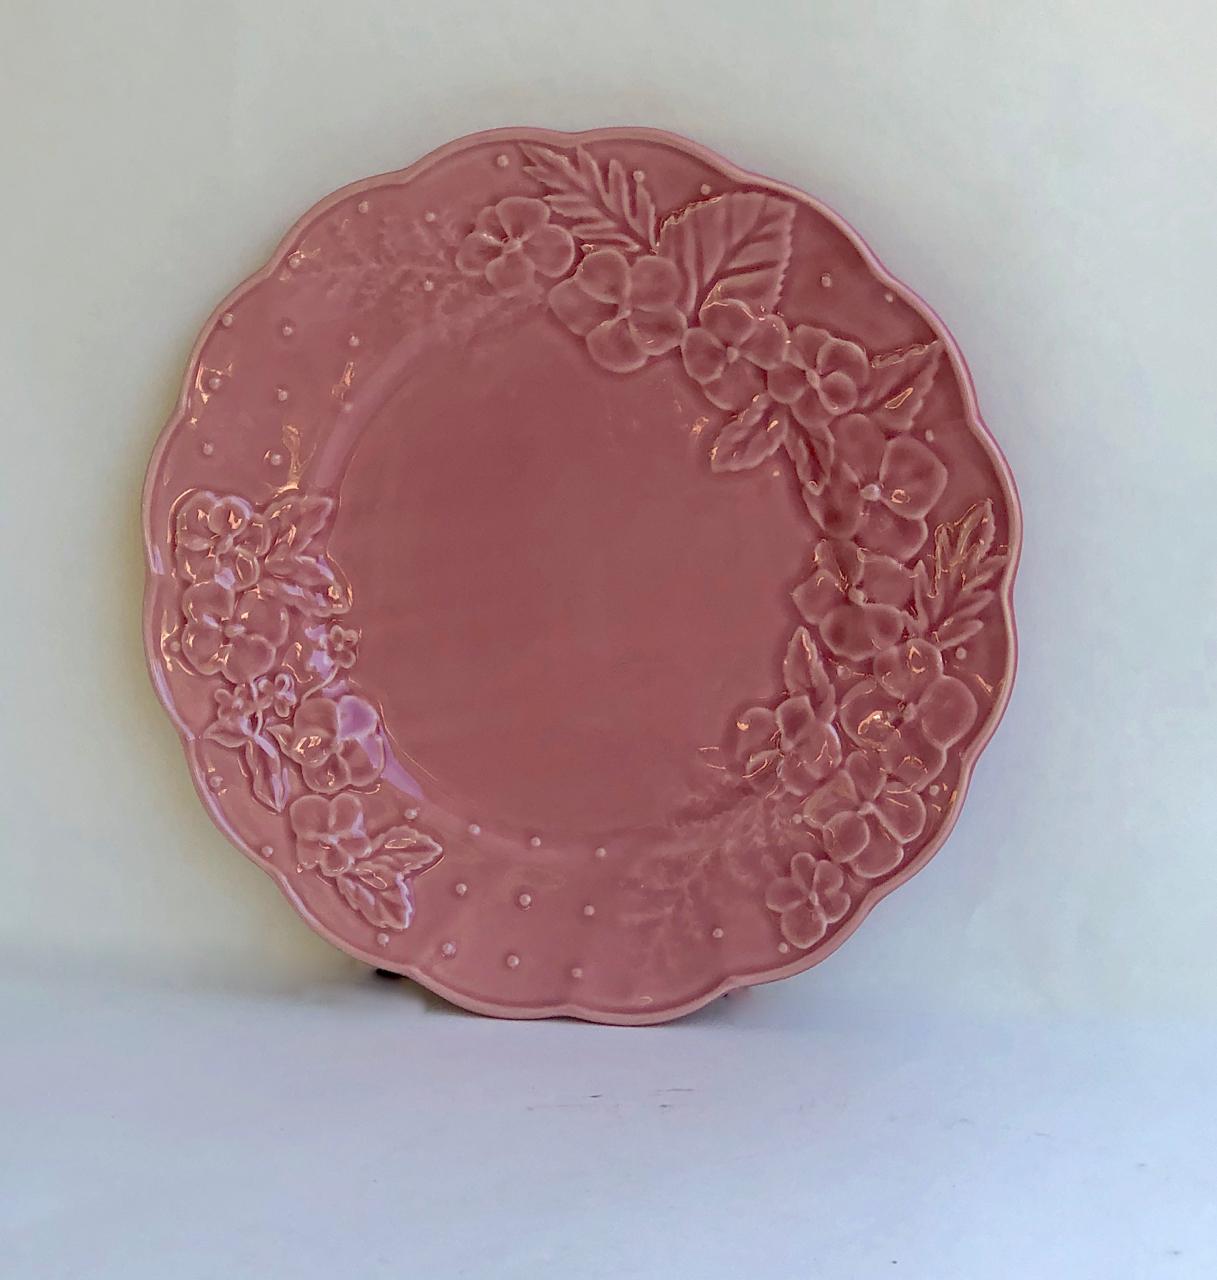 This is superb set of 12 Bordallo Piniero Dinner Plates in a discontinued pansy-inspired pattern. The rich coral glaze is unusual and very current. All 12 plates are in excellent/mint condition. These plates would make a great wall decoration when